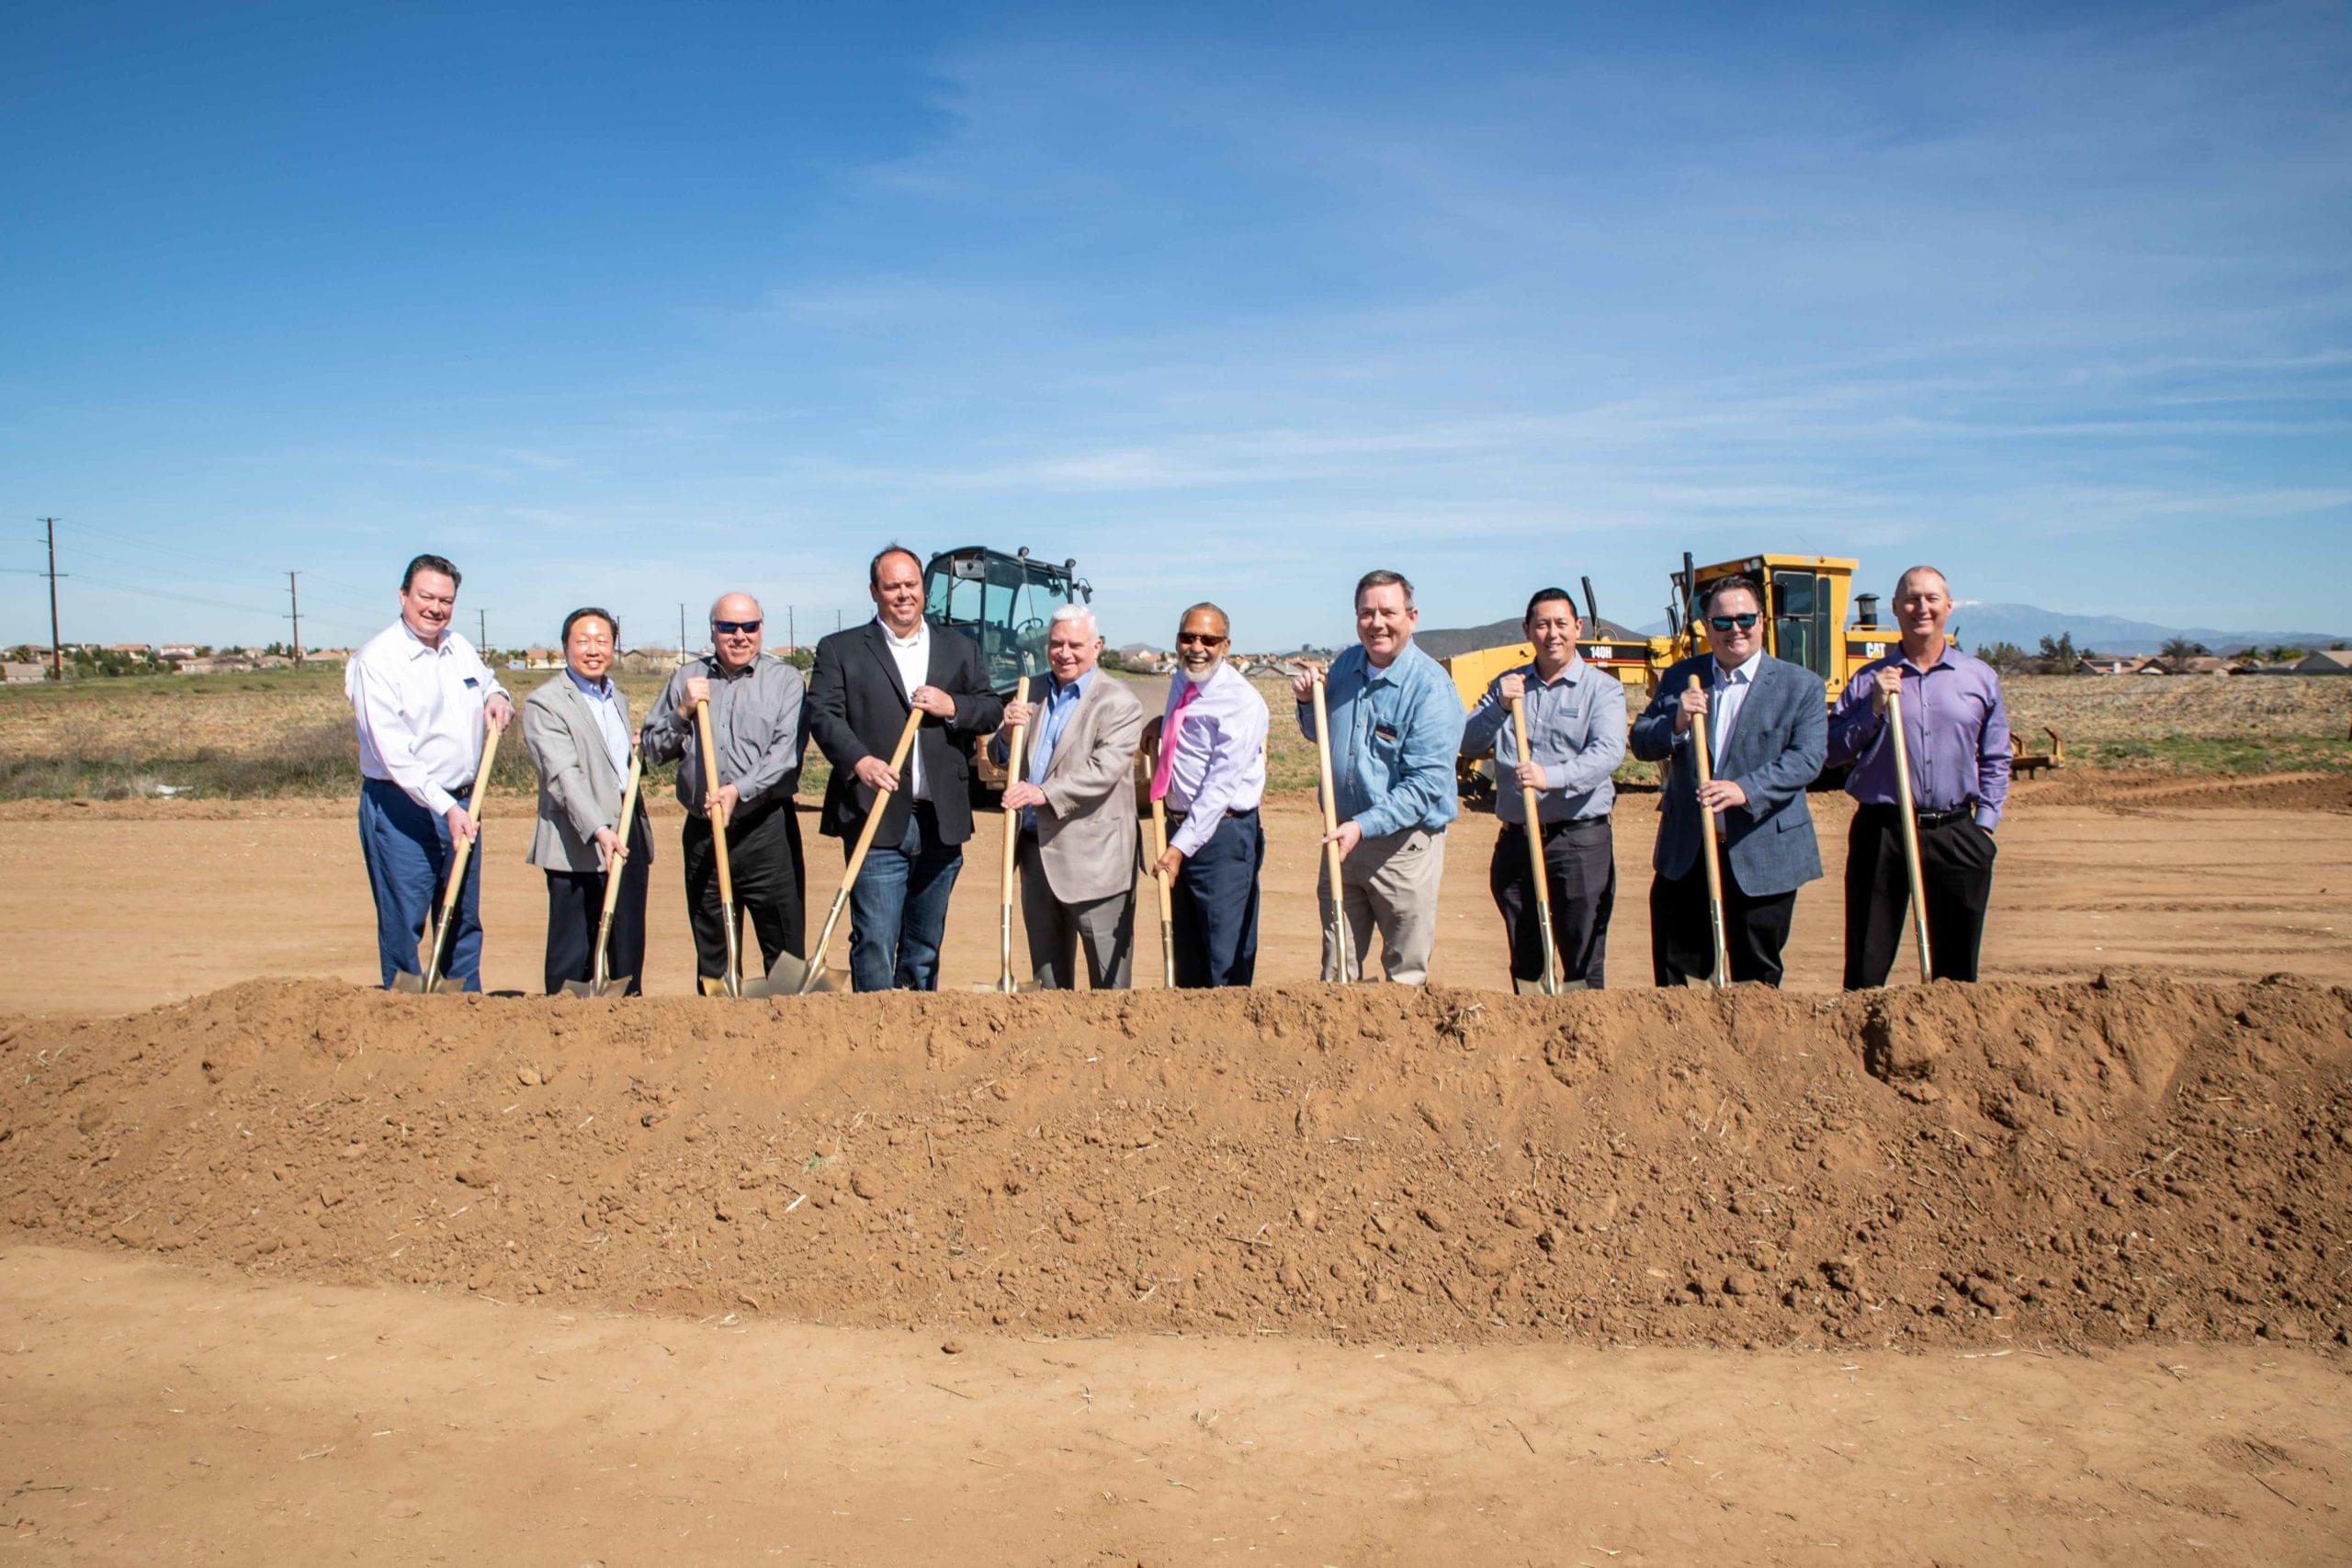 French Valley Ground Breaking: Left to right Pat Reilly, United Development Company Chris Lee, MCG Architects Mike Moorefield, Moorefield Construction Chris Peto, Halferty Development Company Jim Halferty, Halferty Development Company Chuck Washington, Riverside County, CA Supervisor Biff McGuire, United Development Company David Woosley, 7-Eleven Nick Wirick, Lee & Associates Bryan Tiffin, LA Fitness